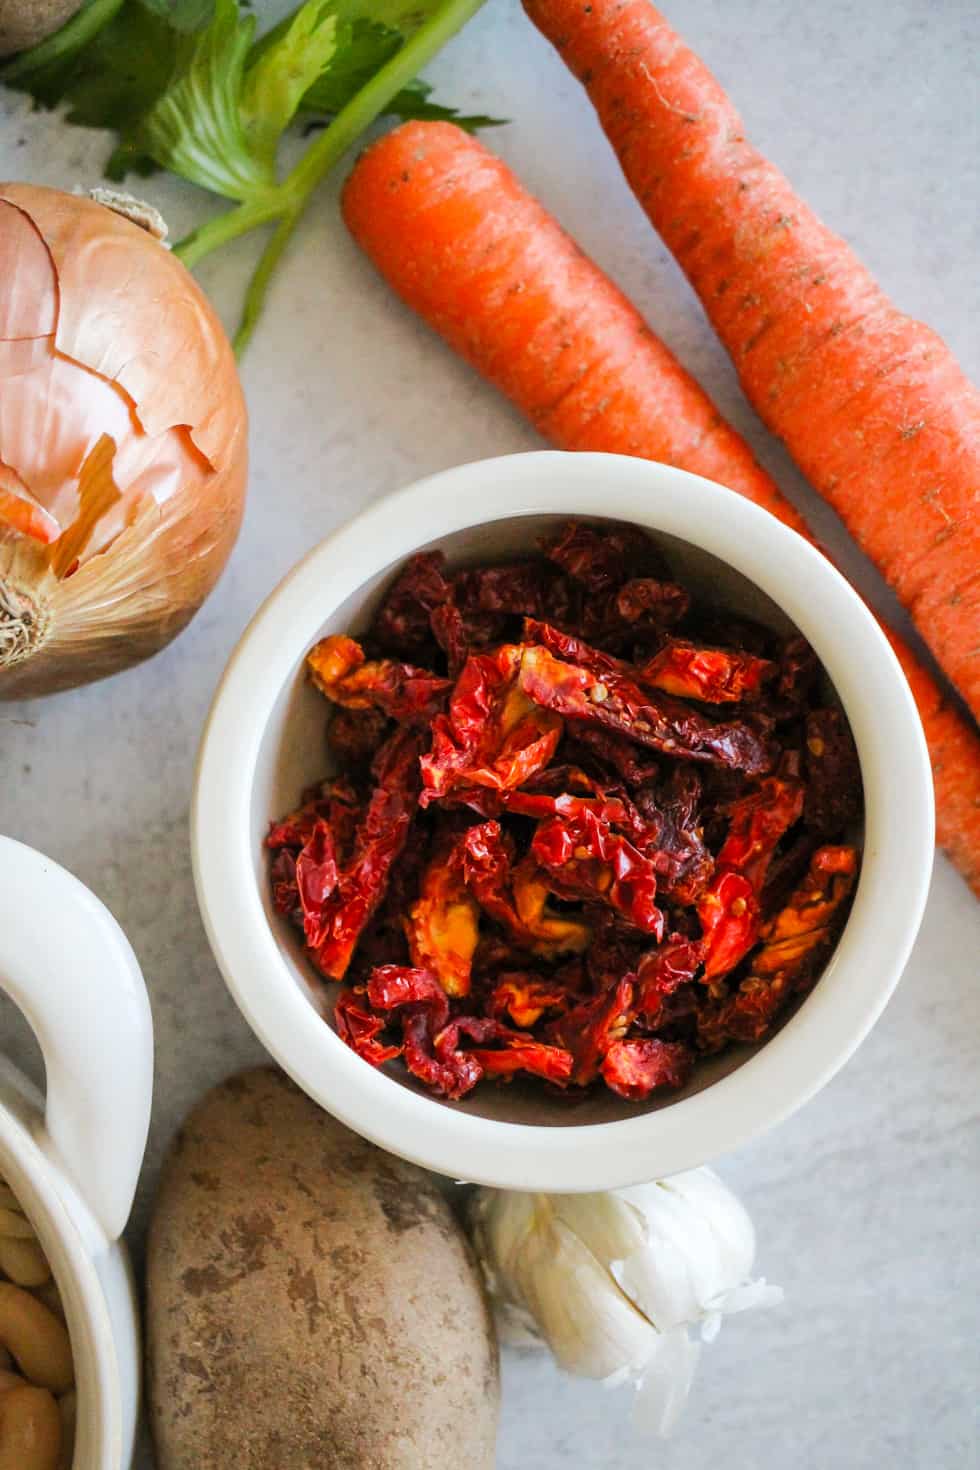 Bowl of sun-dried tomatoes with carrots, onion, and potato